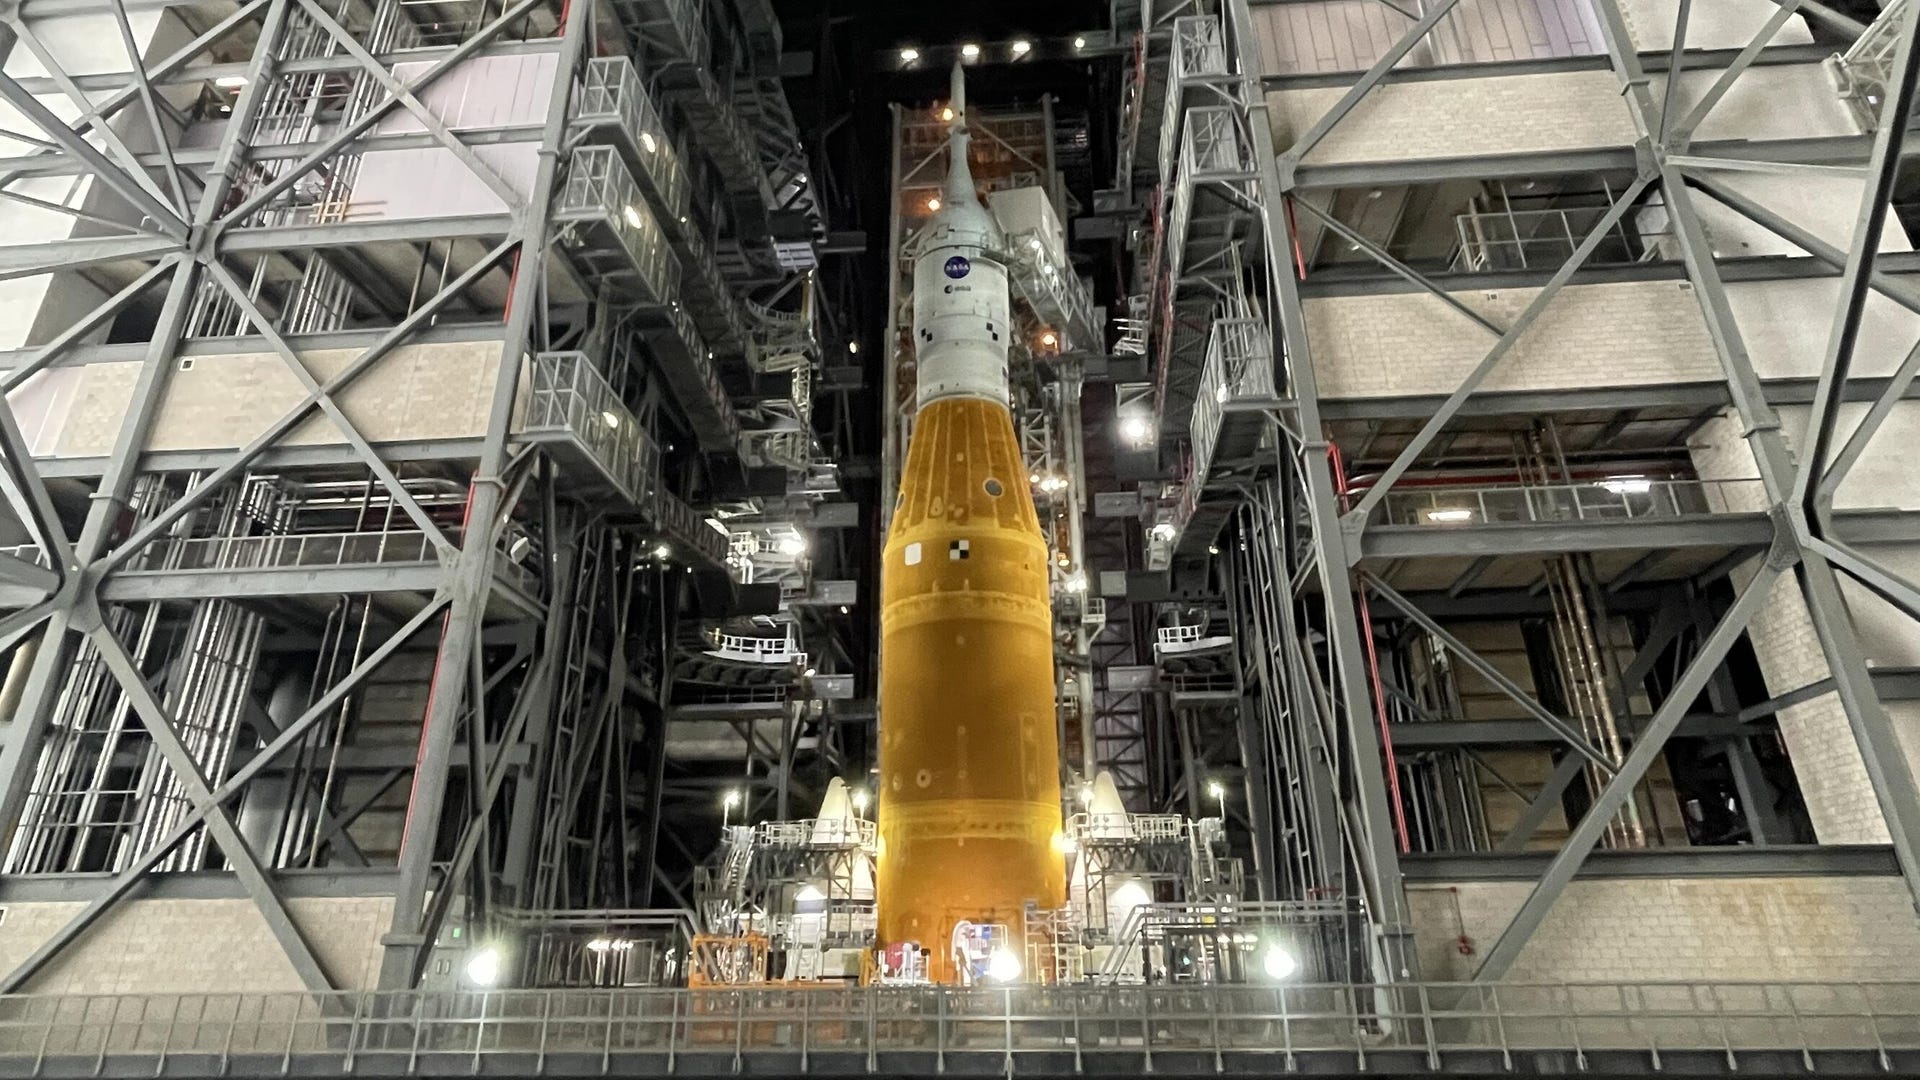 SLS and Orion, together a white capsule on top of an orange rocket surrounded by platforms inside a giant garage.